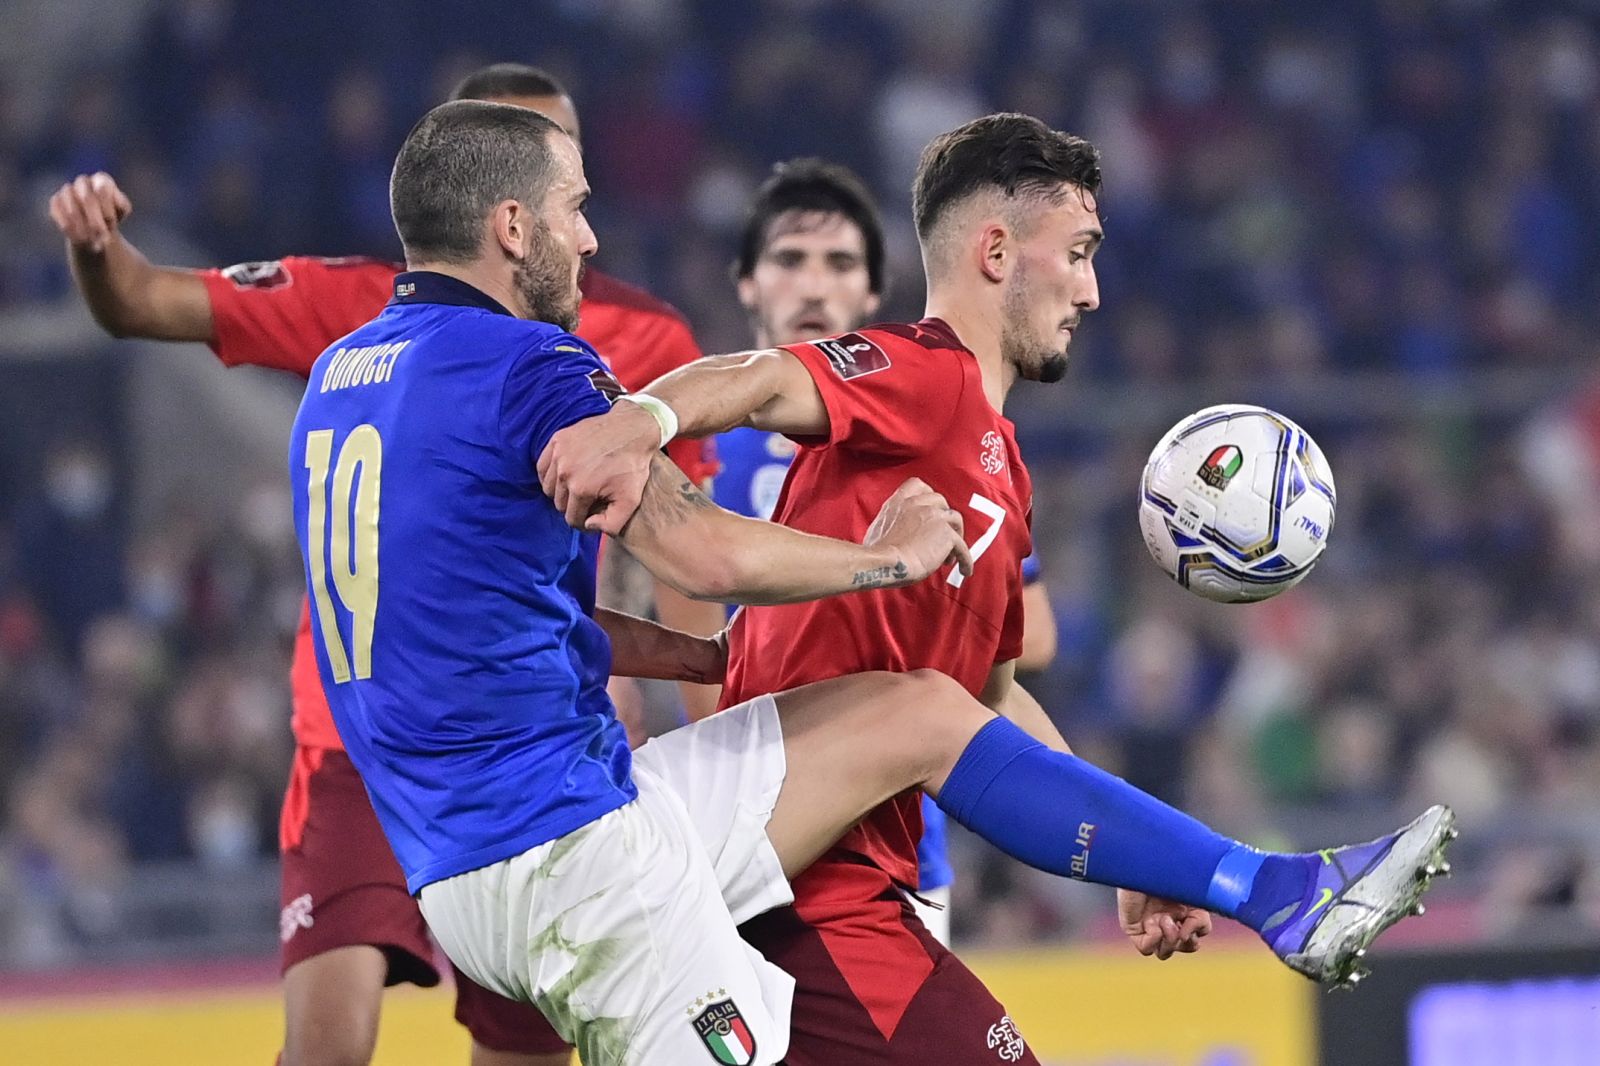 epa09579592 Italy's defender Leonardo Bonucci (L) fights for the ball against Switzerland's forward Andi Zeqiri during the 2022 FIFA World Cup European Qualifying Group C match between Italy and Switzerland at the Stadio Olimpico in Rome, Italy, 12 November 2021.  EPA/JEAN-CHRISTOPHE BOTT